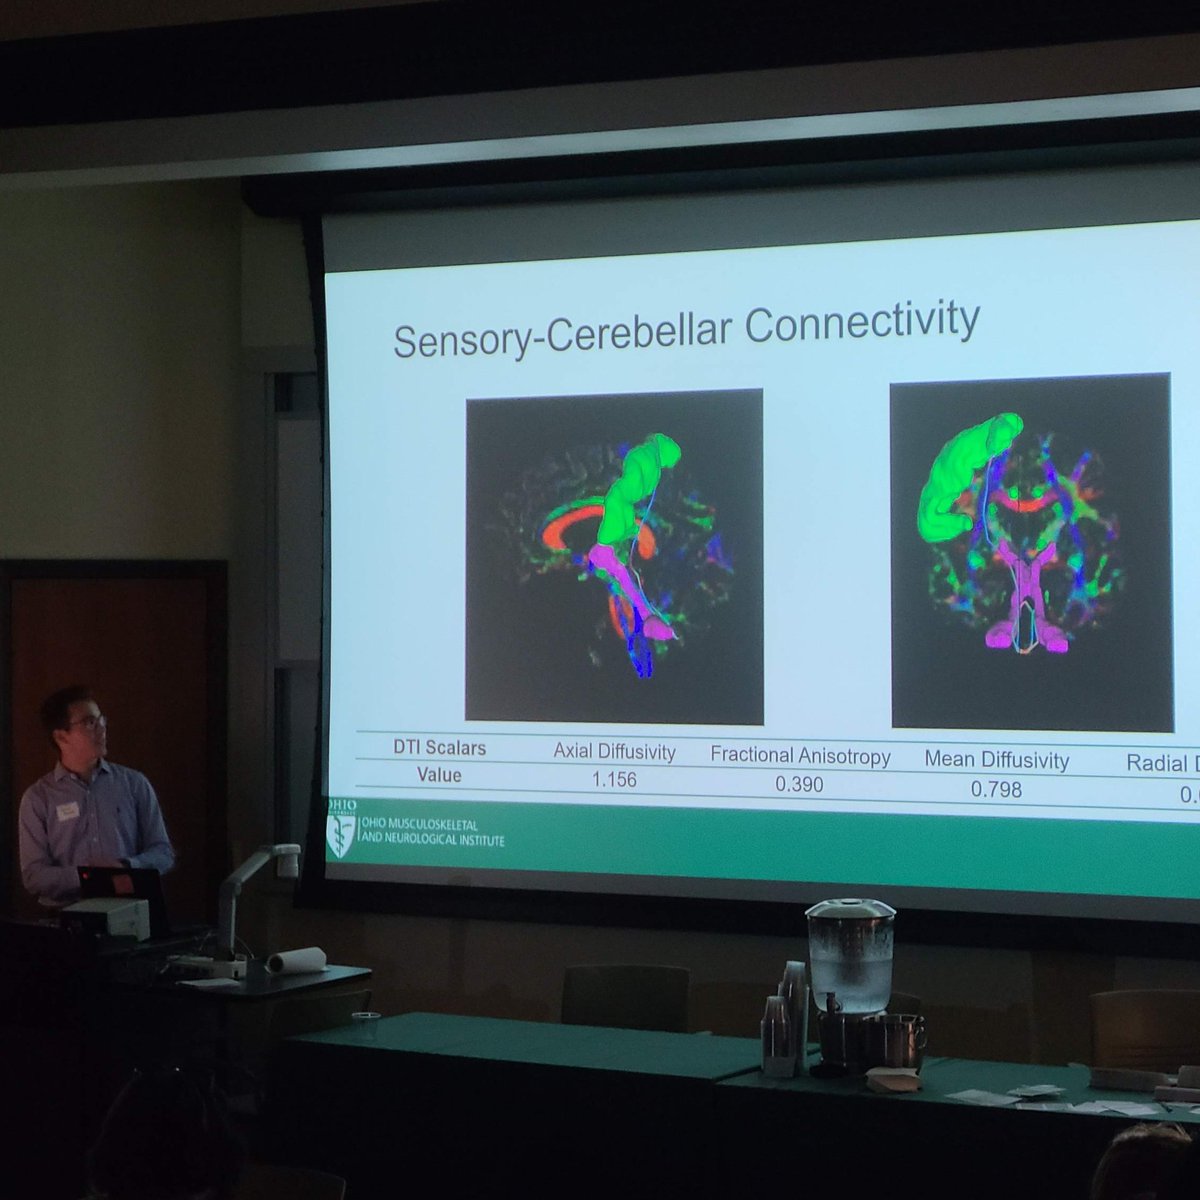 @NMBHAL_Lab @OMNIohio @OUHCOM student Aaron Batke presenting @MeditouchL BalanceTutor Perturbation data and brain structural diffusion tractography between S1 and cerebellum in collaboration with @amberschnittjer @JanetSimon51 @CHSPOhio @OhioU_PT